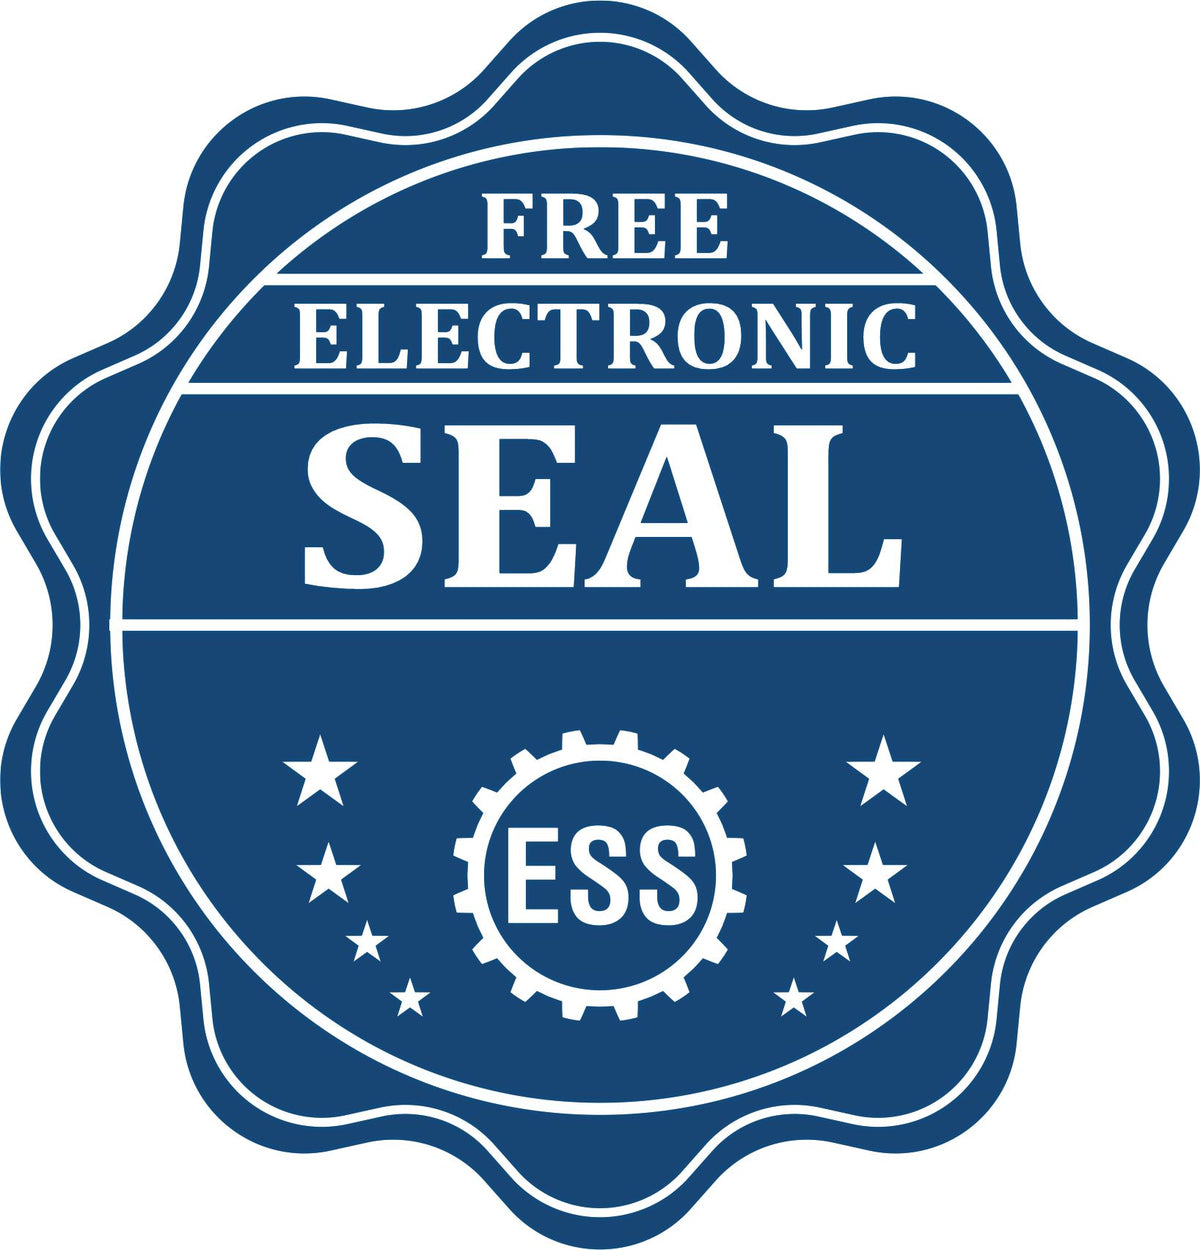 A badge showing a free electronic seal for the Premium MaxLight Pre-Inked Arizona Geology Stamp with stars and the ESS gear on the emblem.